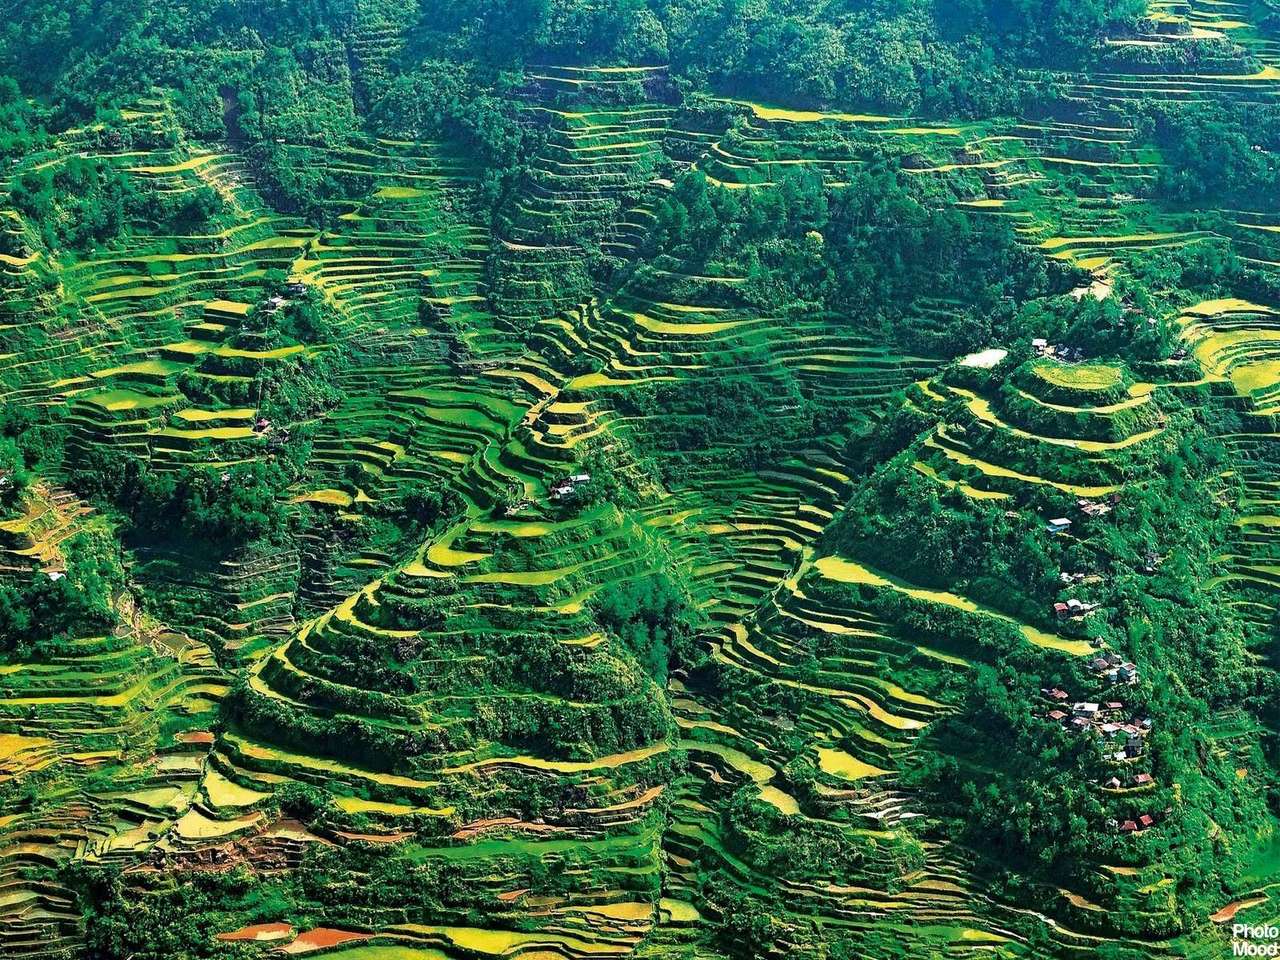 Banaue Rice Terraces of the Philippines puzzle online from photo